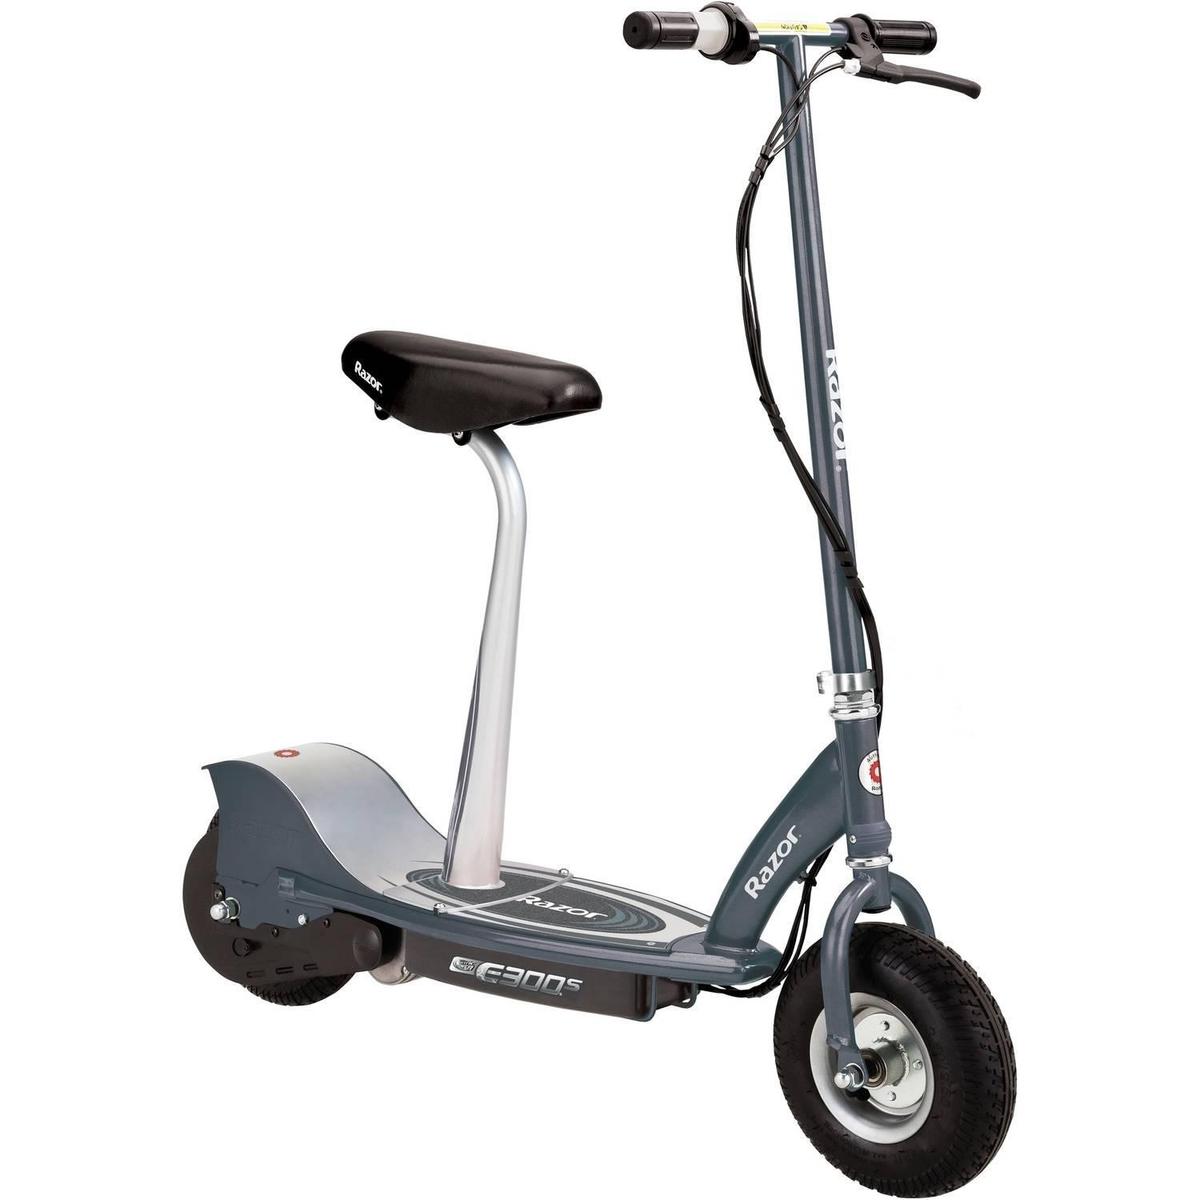 Razor E300S Seated Electric Scooter - 9" Air-filled Tires, Removable Seat, Gray - $229.99 MSRP